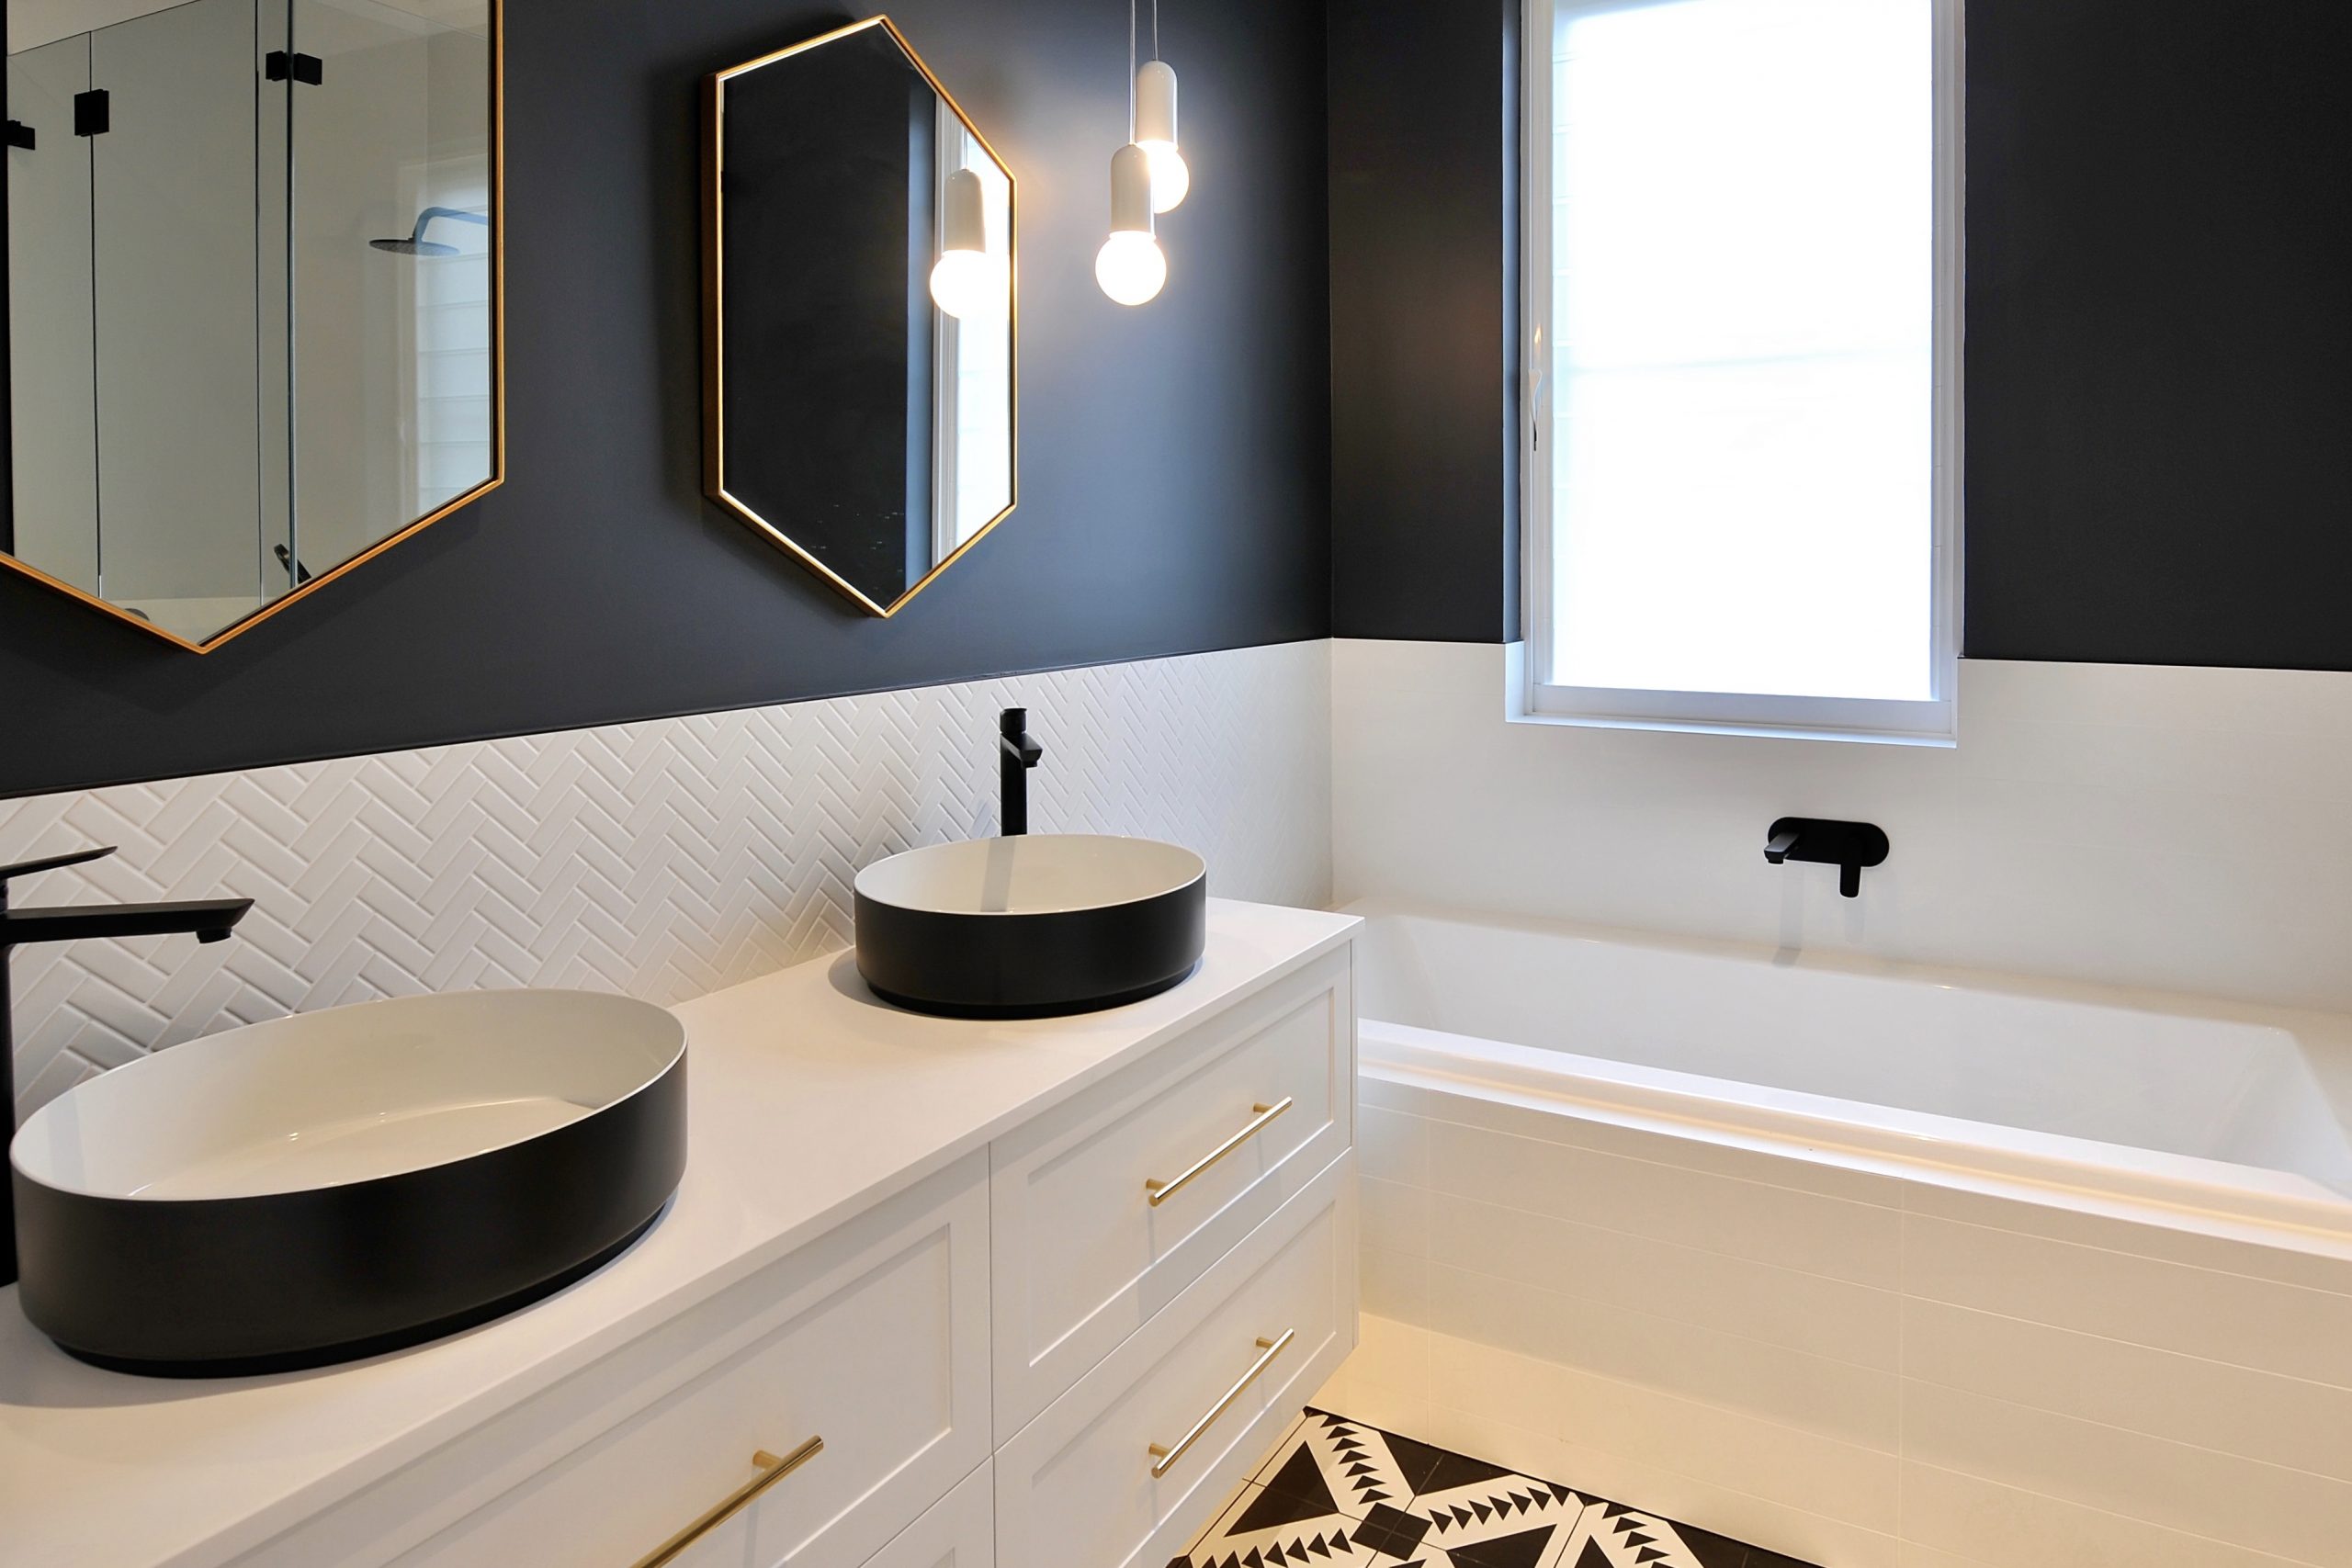 5 Design Solution to help make a tiny bathroom look larger